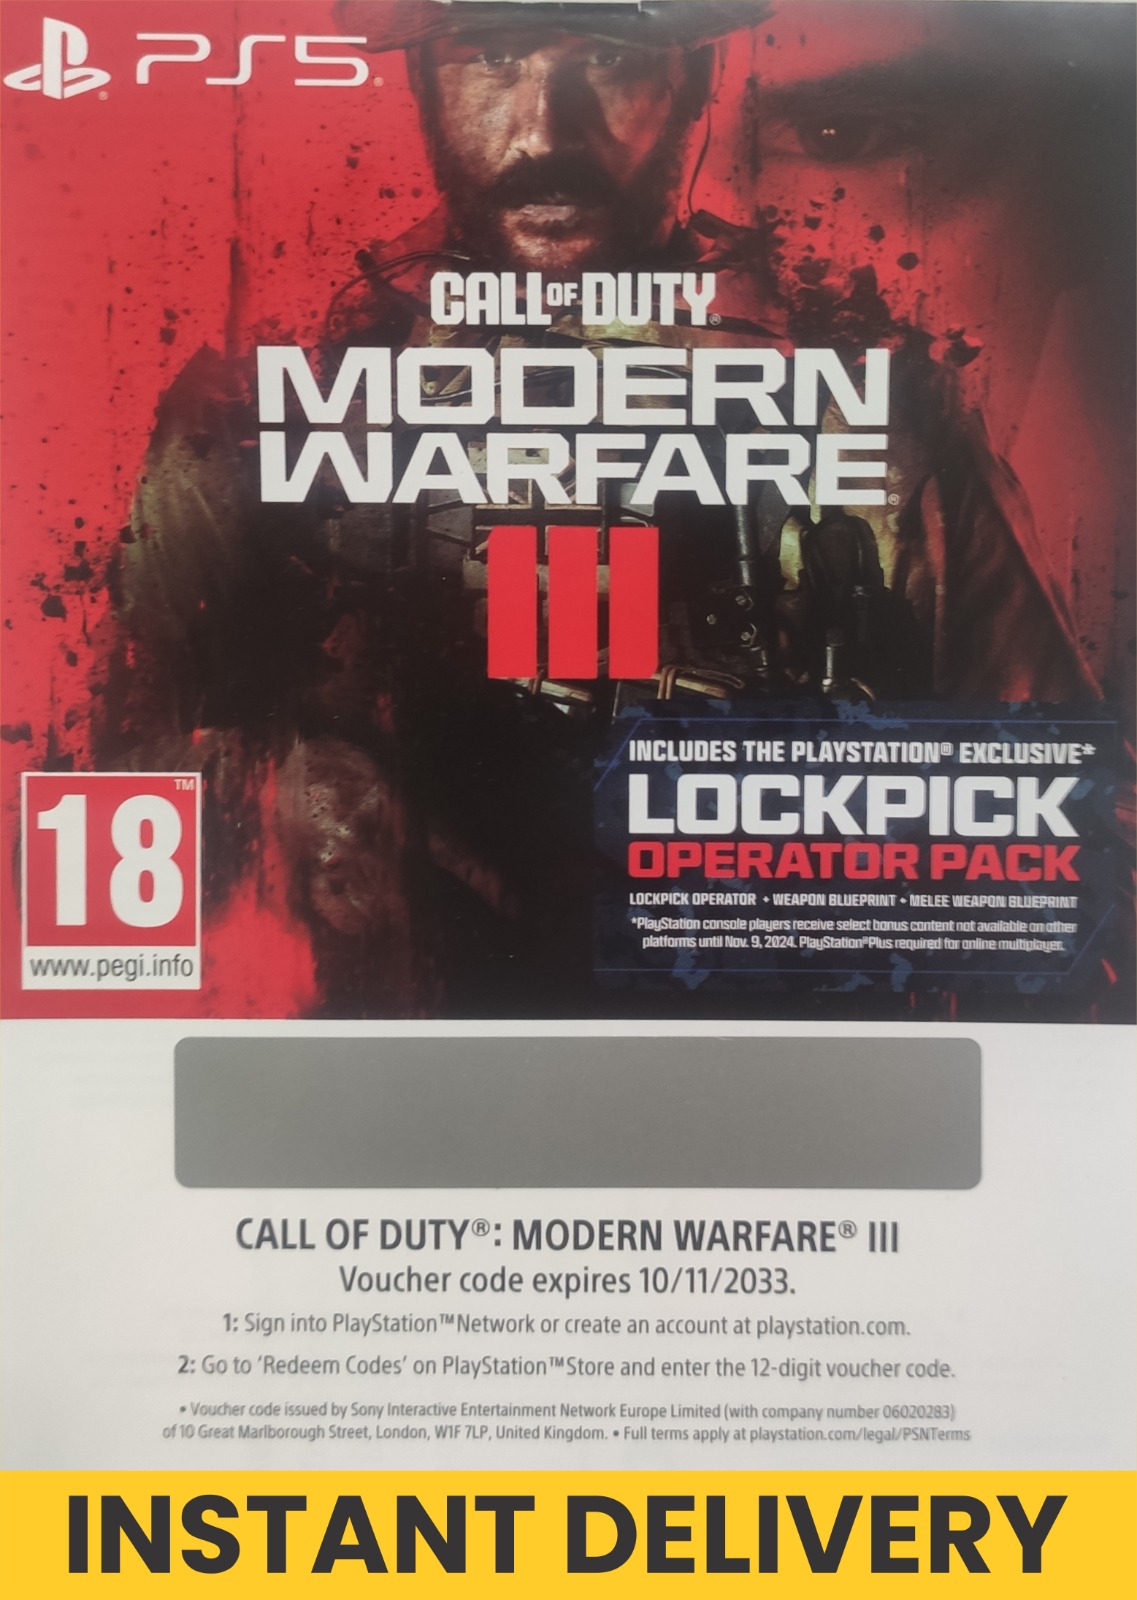 PlayStation PS5 MW3 (PS5 Modern Warfare 3 Digital Voucher Code) (Instant  Delivery on WhatsApp)